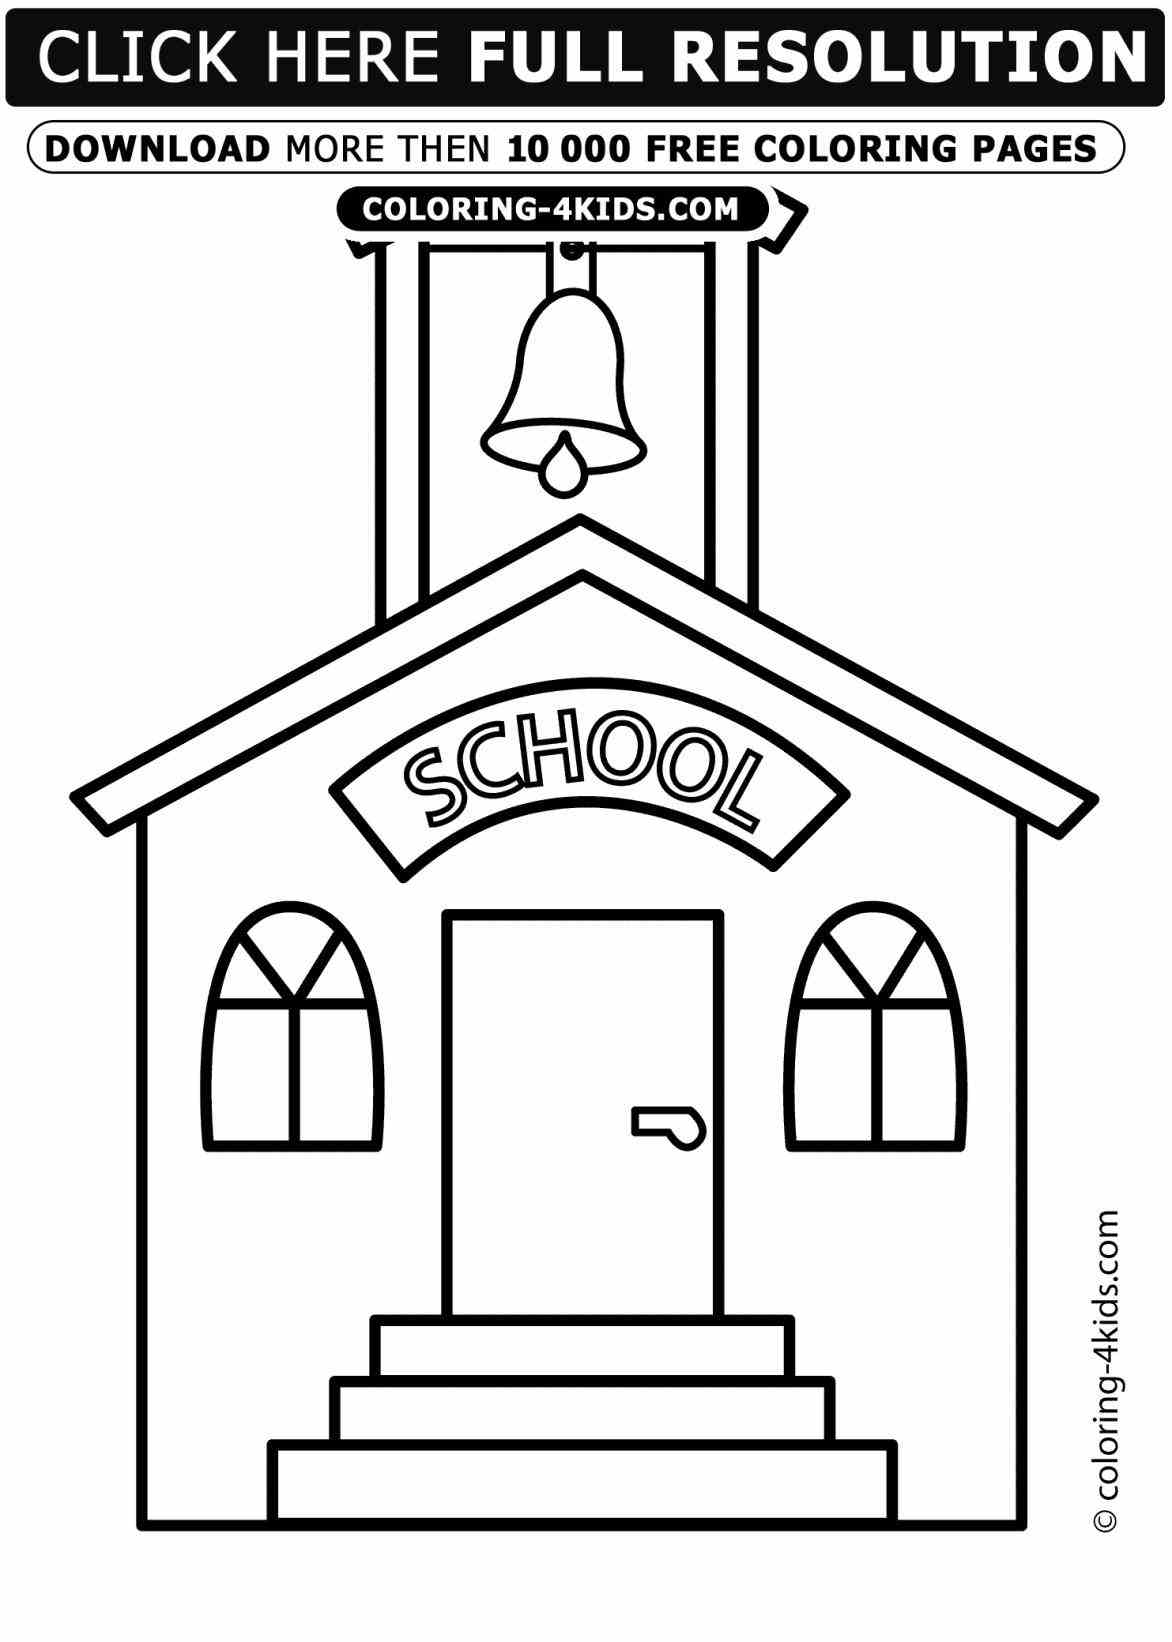 school building clipart black and white.